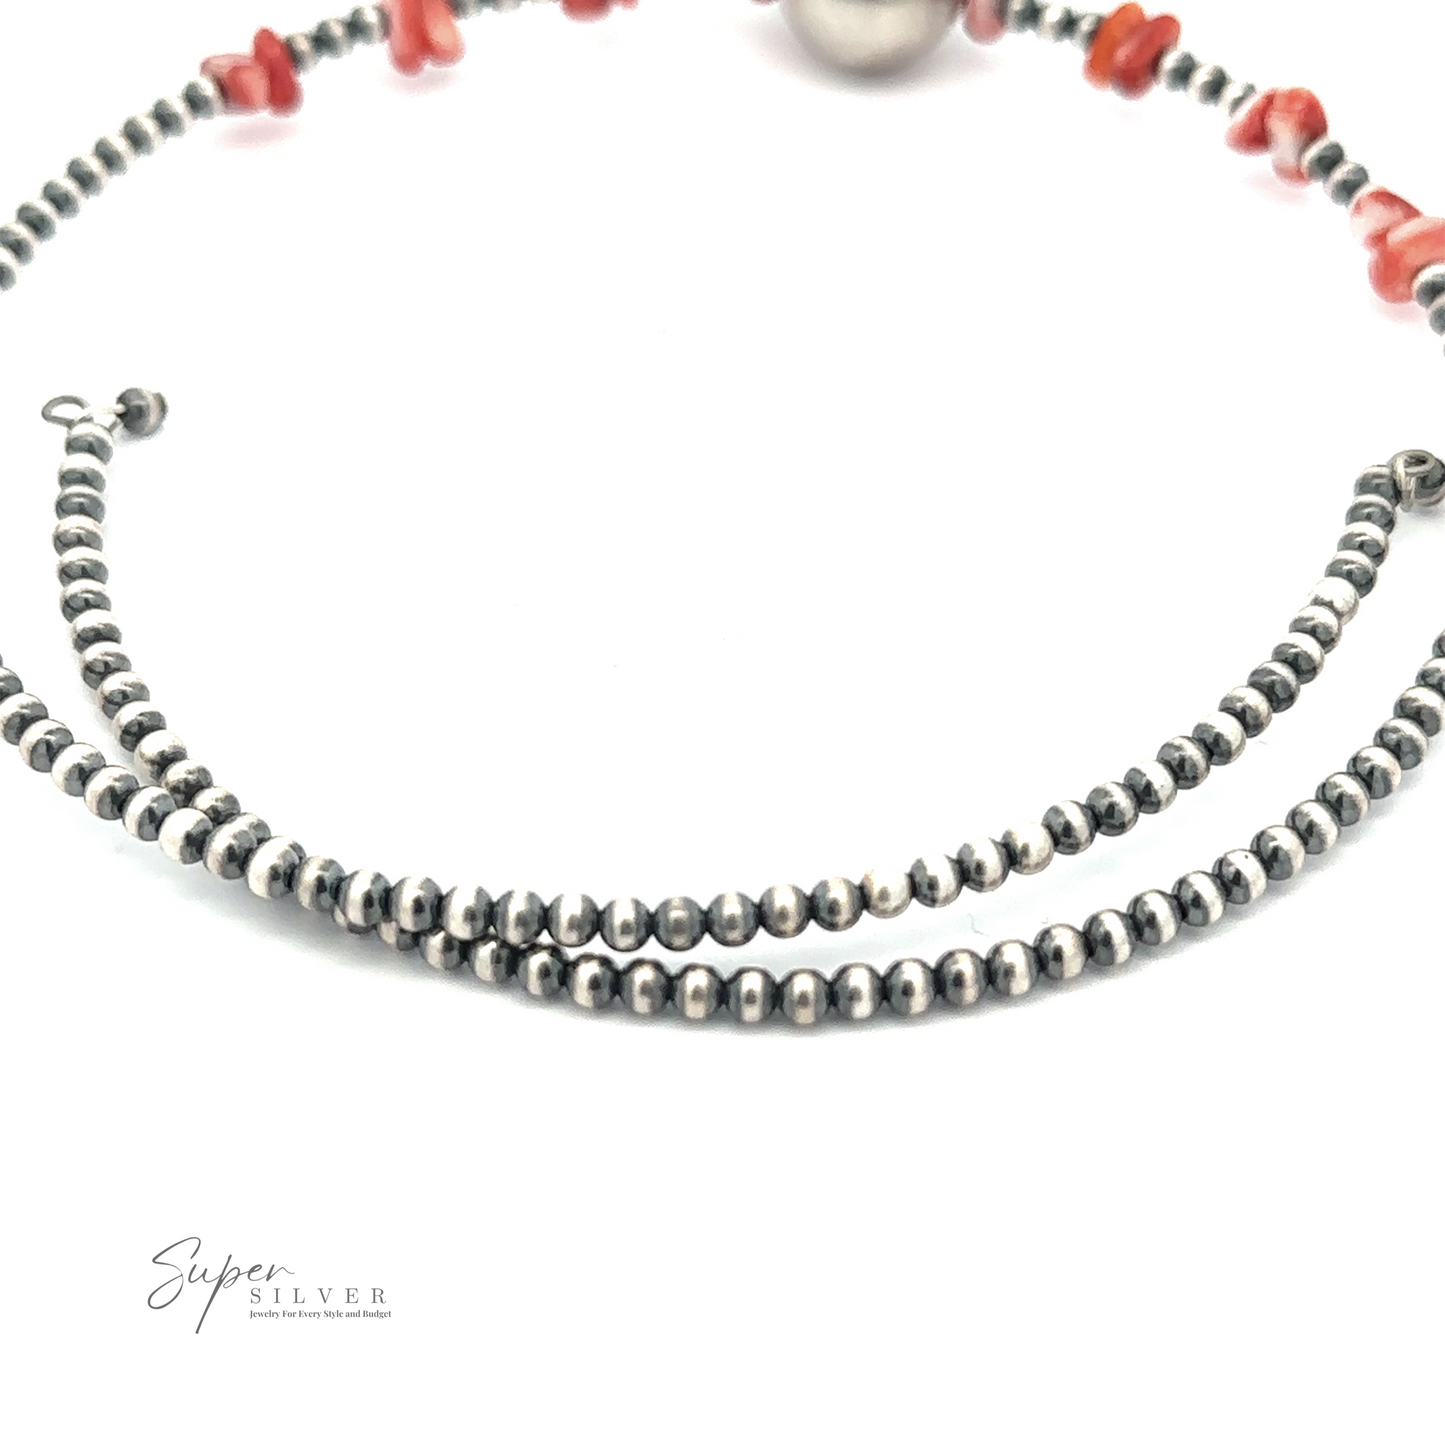 
                  
                    A Wrap Around Spiny Oyster Shell Choker Necklace featuring small silver beads and red coral chunks, reminiscent of Navajo pearls, shown against a white background, with the text "Super Silver" in the bottom left corner.
                  
                